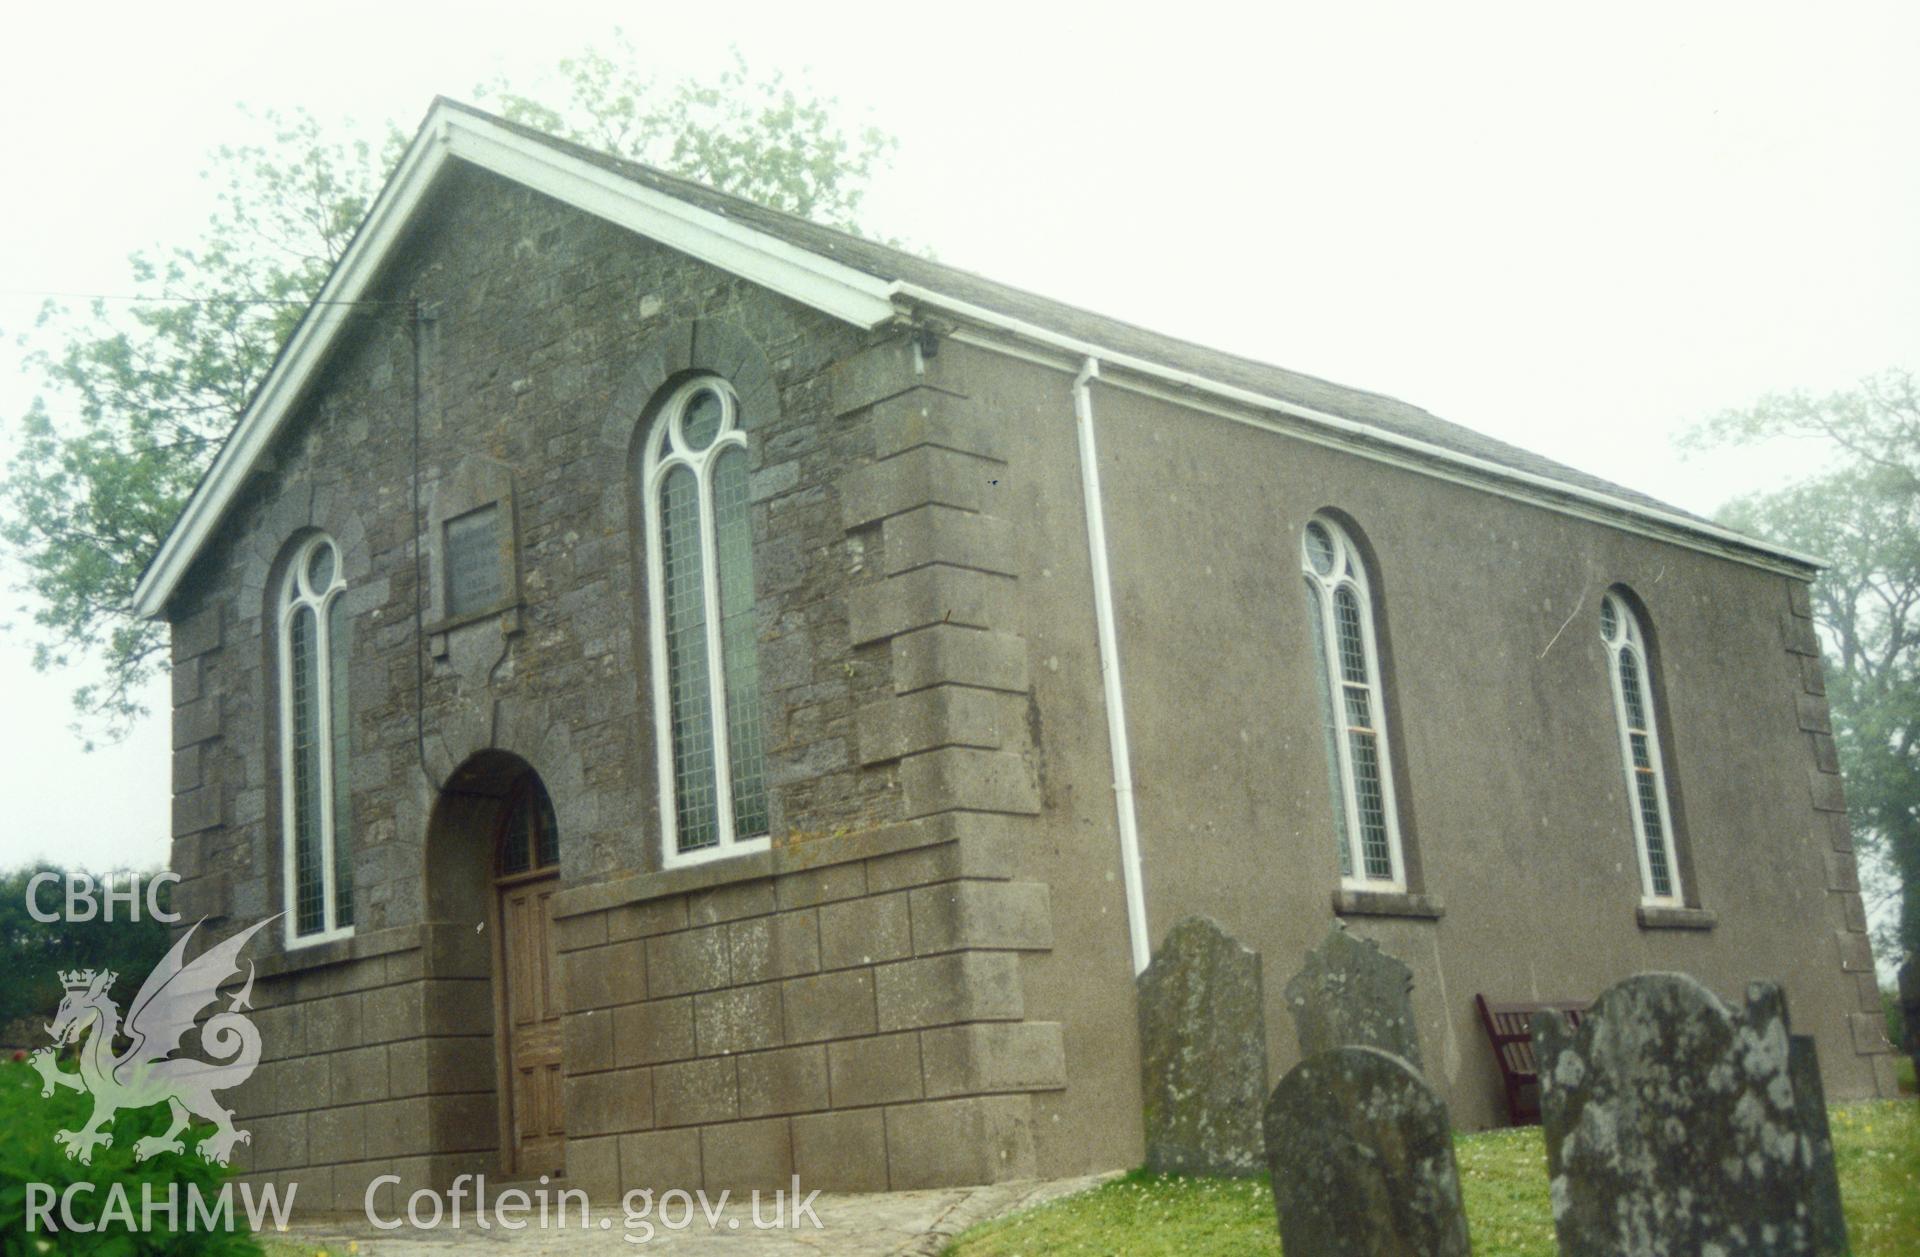 Digital copy of a colour photograph showing an exterior view of Glanrhyd English Baptist Chapel, Lampeter Velfrey, taken by Robert Scourfield, 1996.